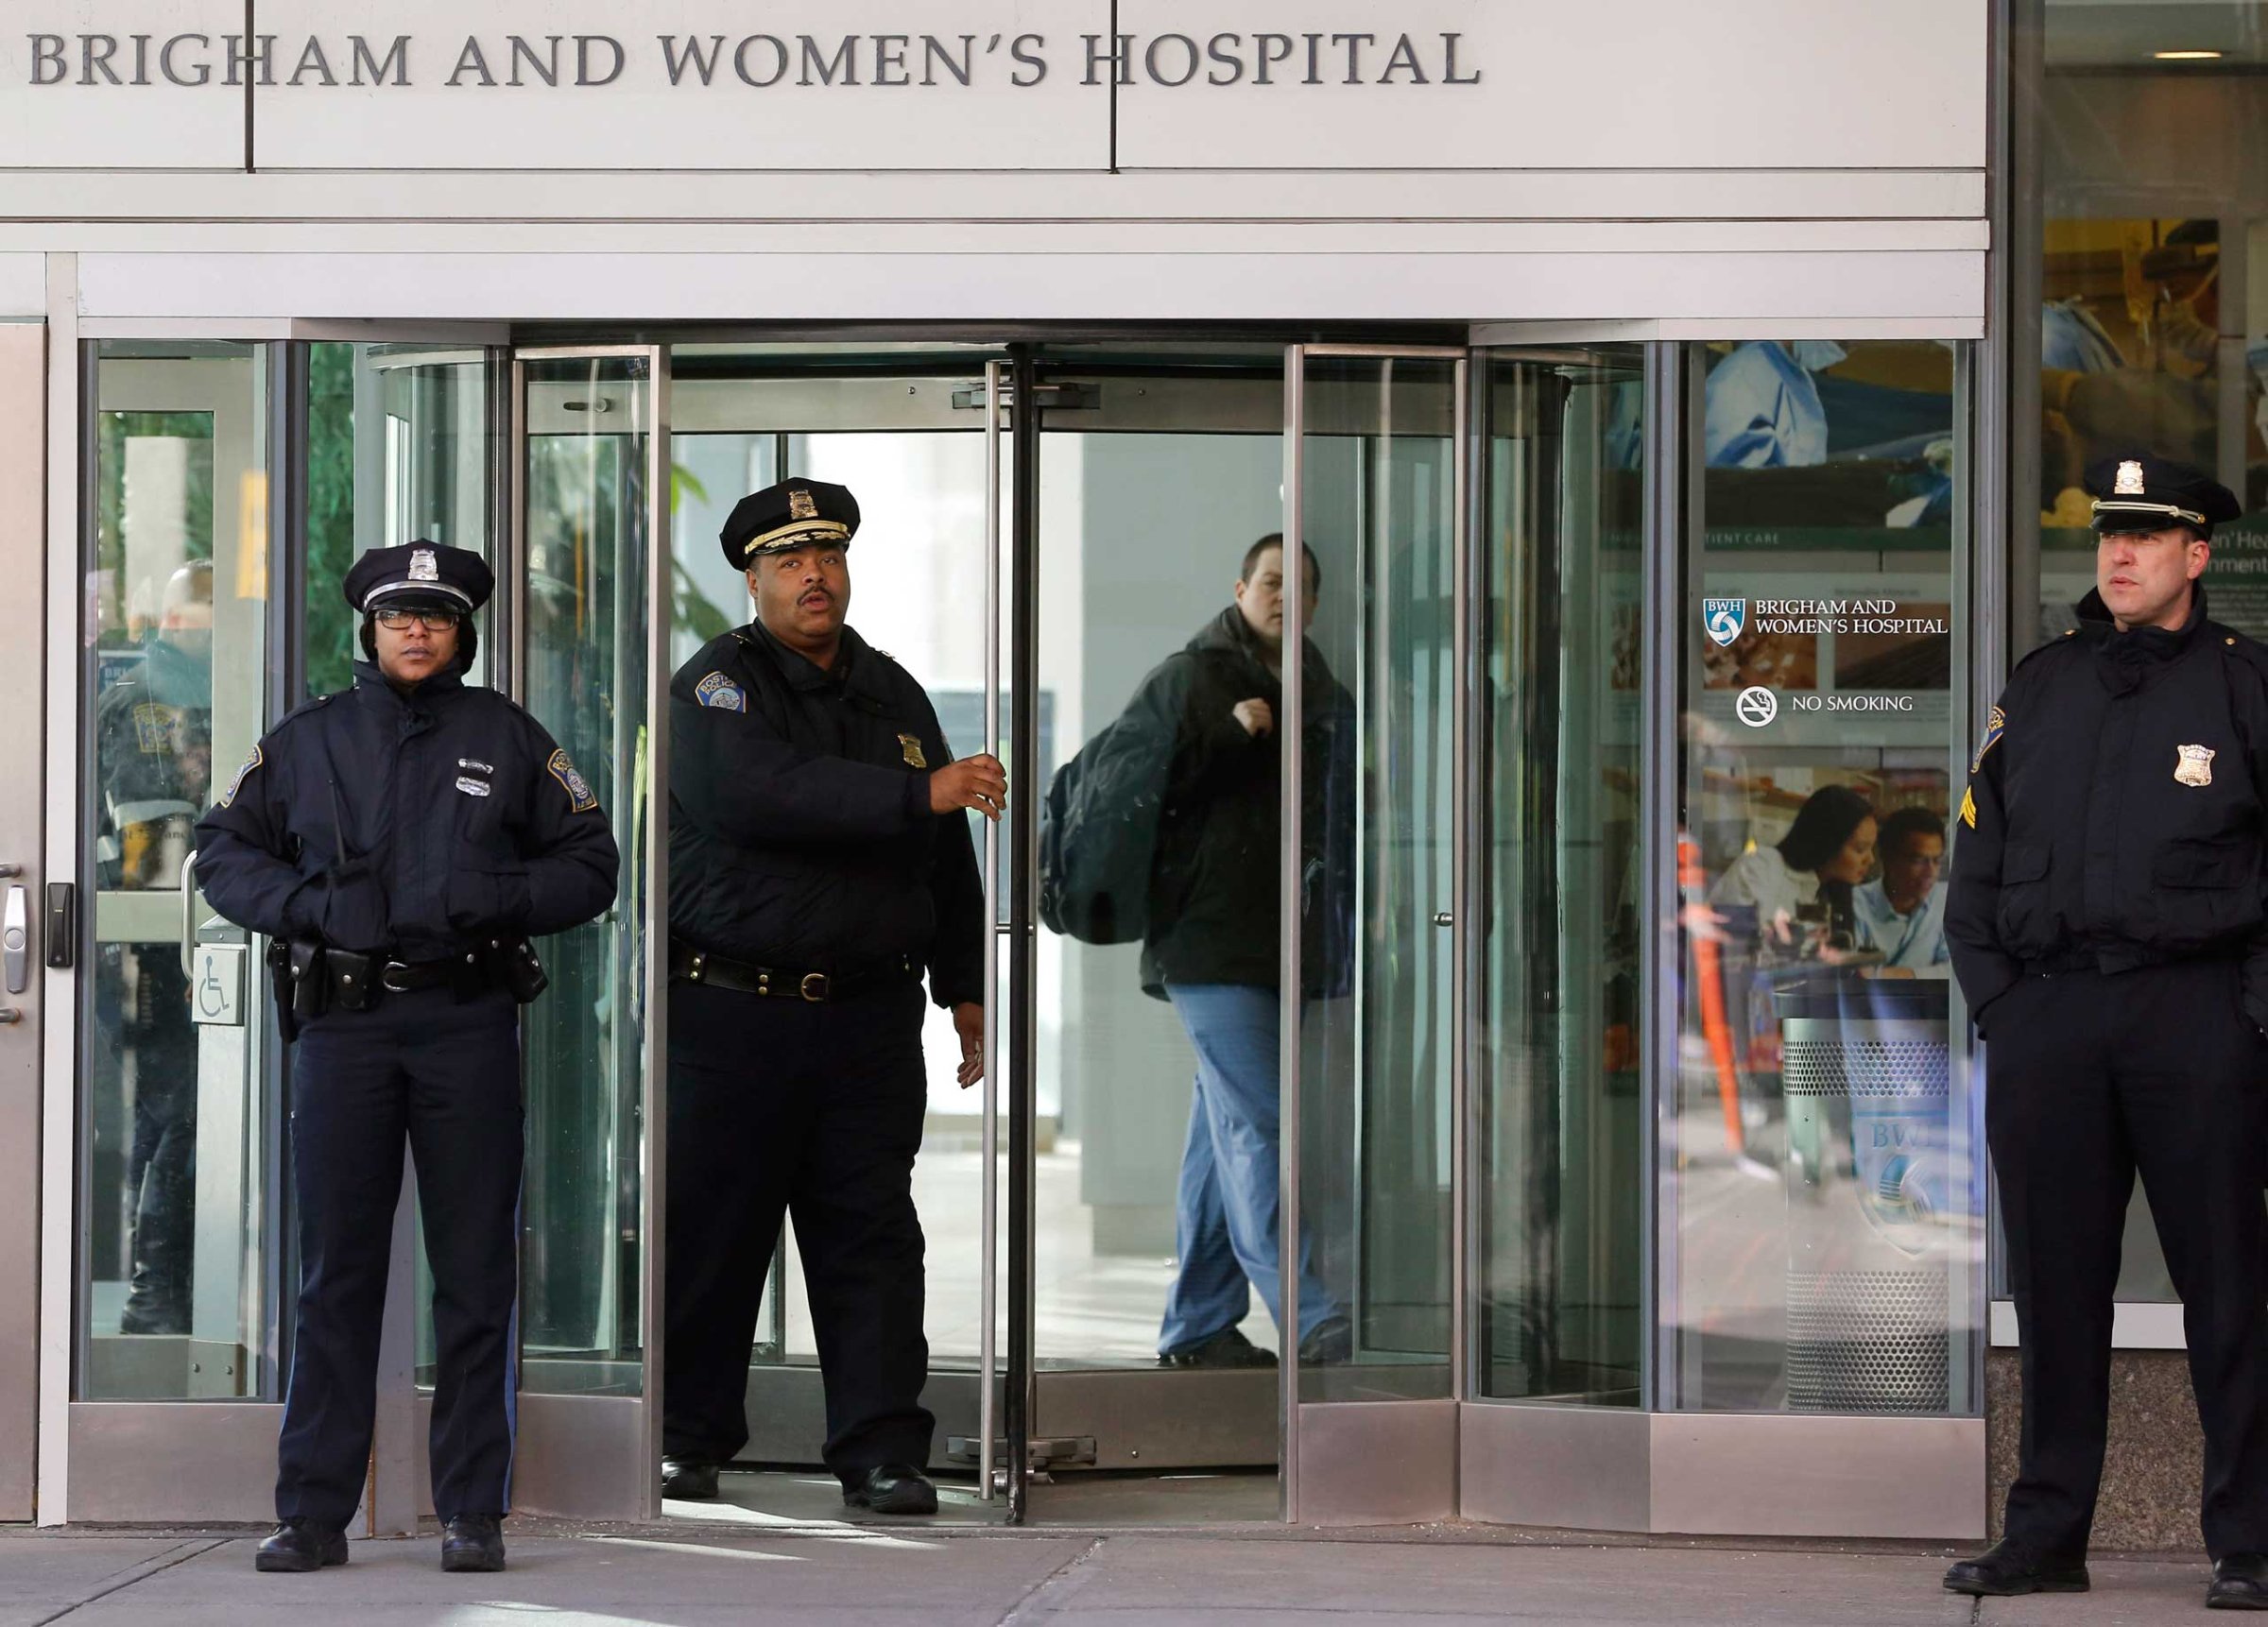 Boston Police Superintendent-in-Chief William Gross, center left, walks through a revolving door as he departs the Shapiro building at Brigham and Women's Hospital, Jan. 20, 2015 in Boston.